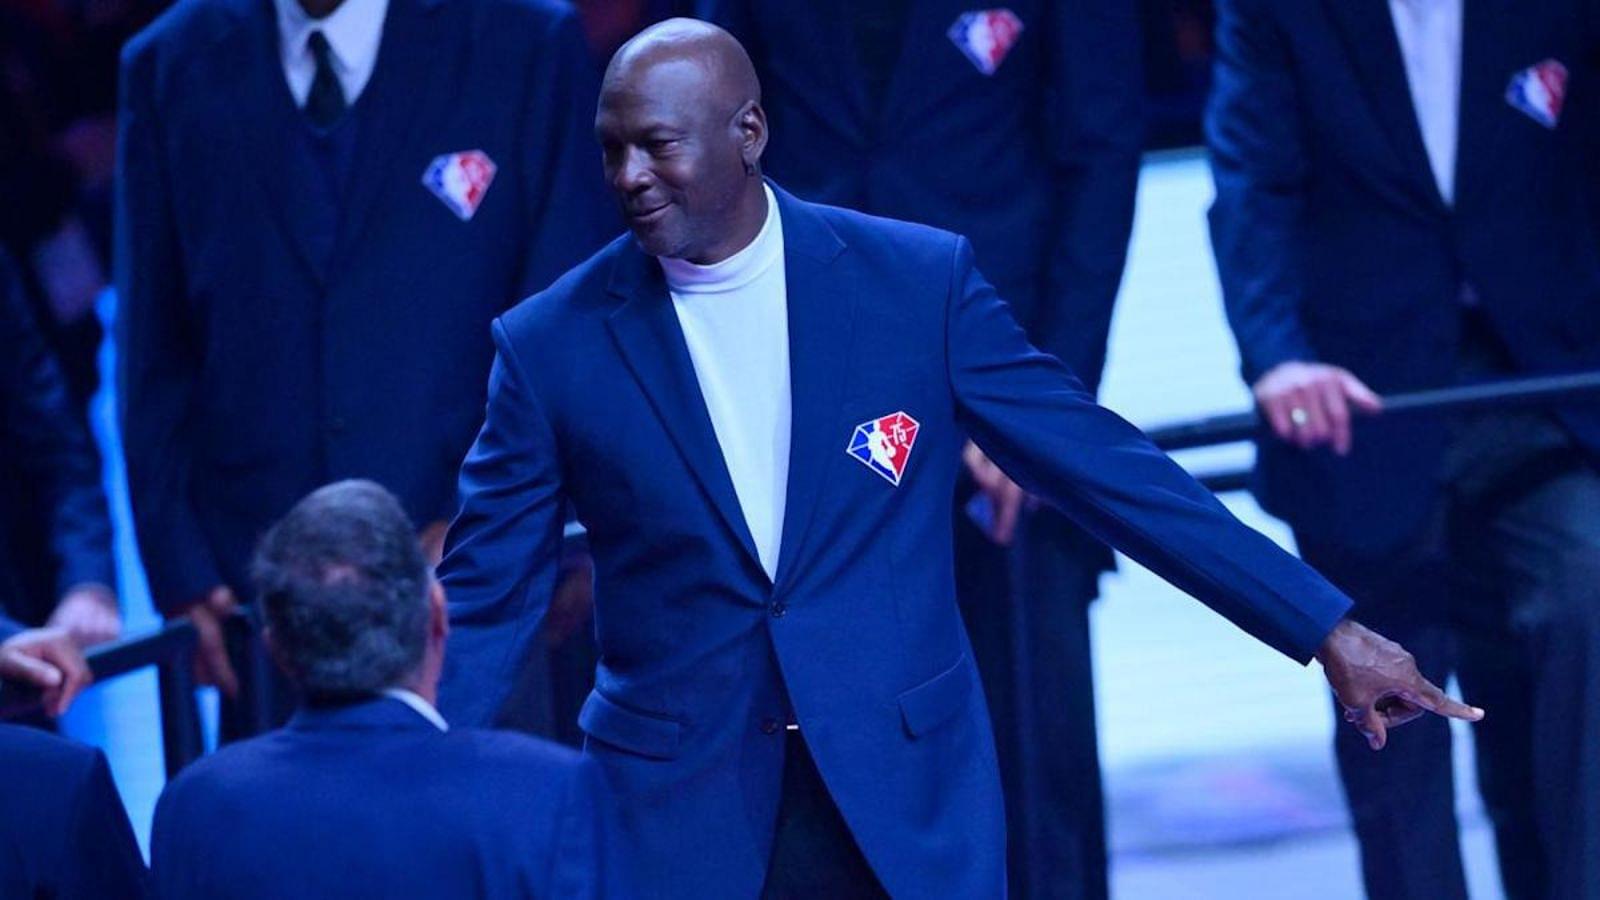 “Michael Jordan comes back for another ‘Last Dance’”: Bulls legend grooves with a lady in a rare footage